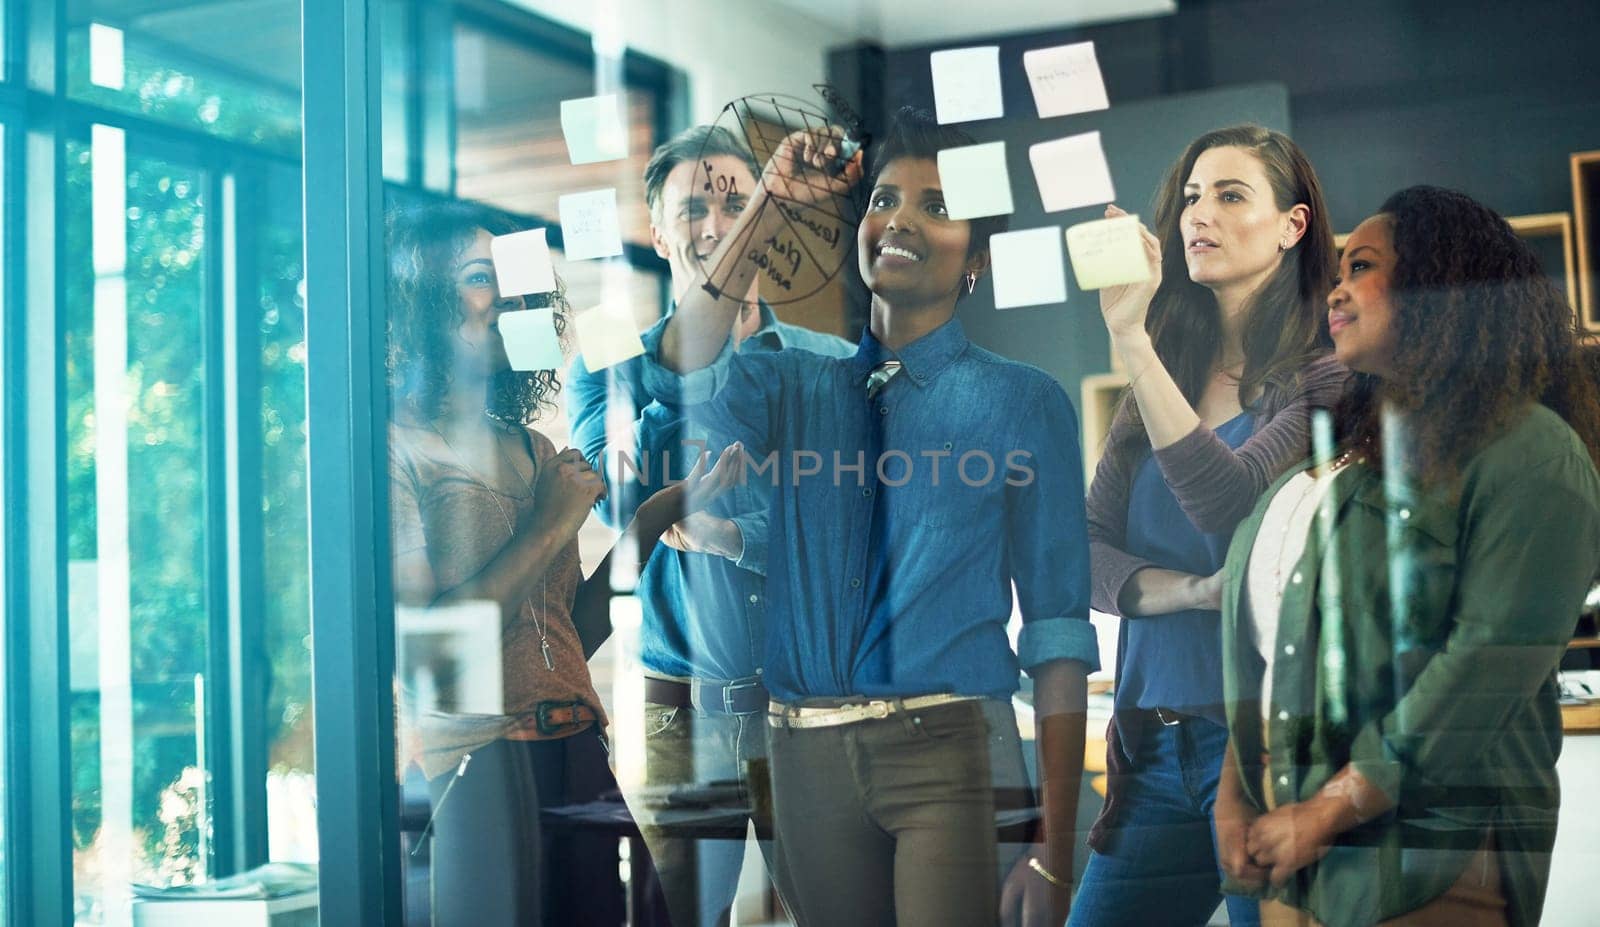 Looking through opportunities for growth and improvement. a group of businesspeople brainstorming with notes on a glass wall in an office